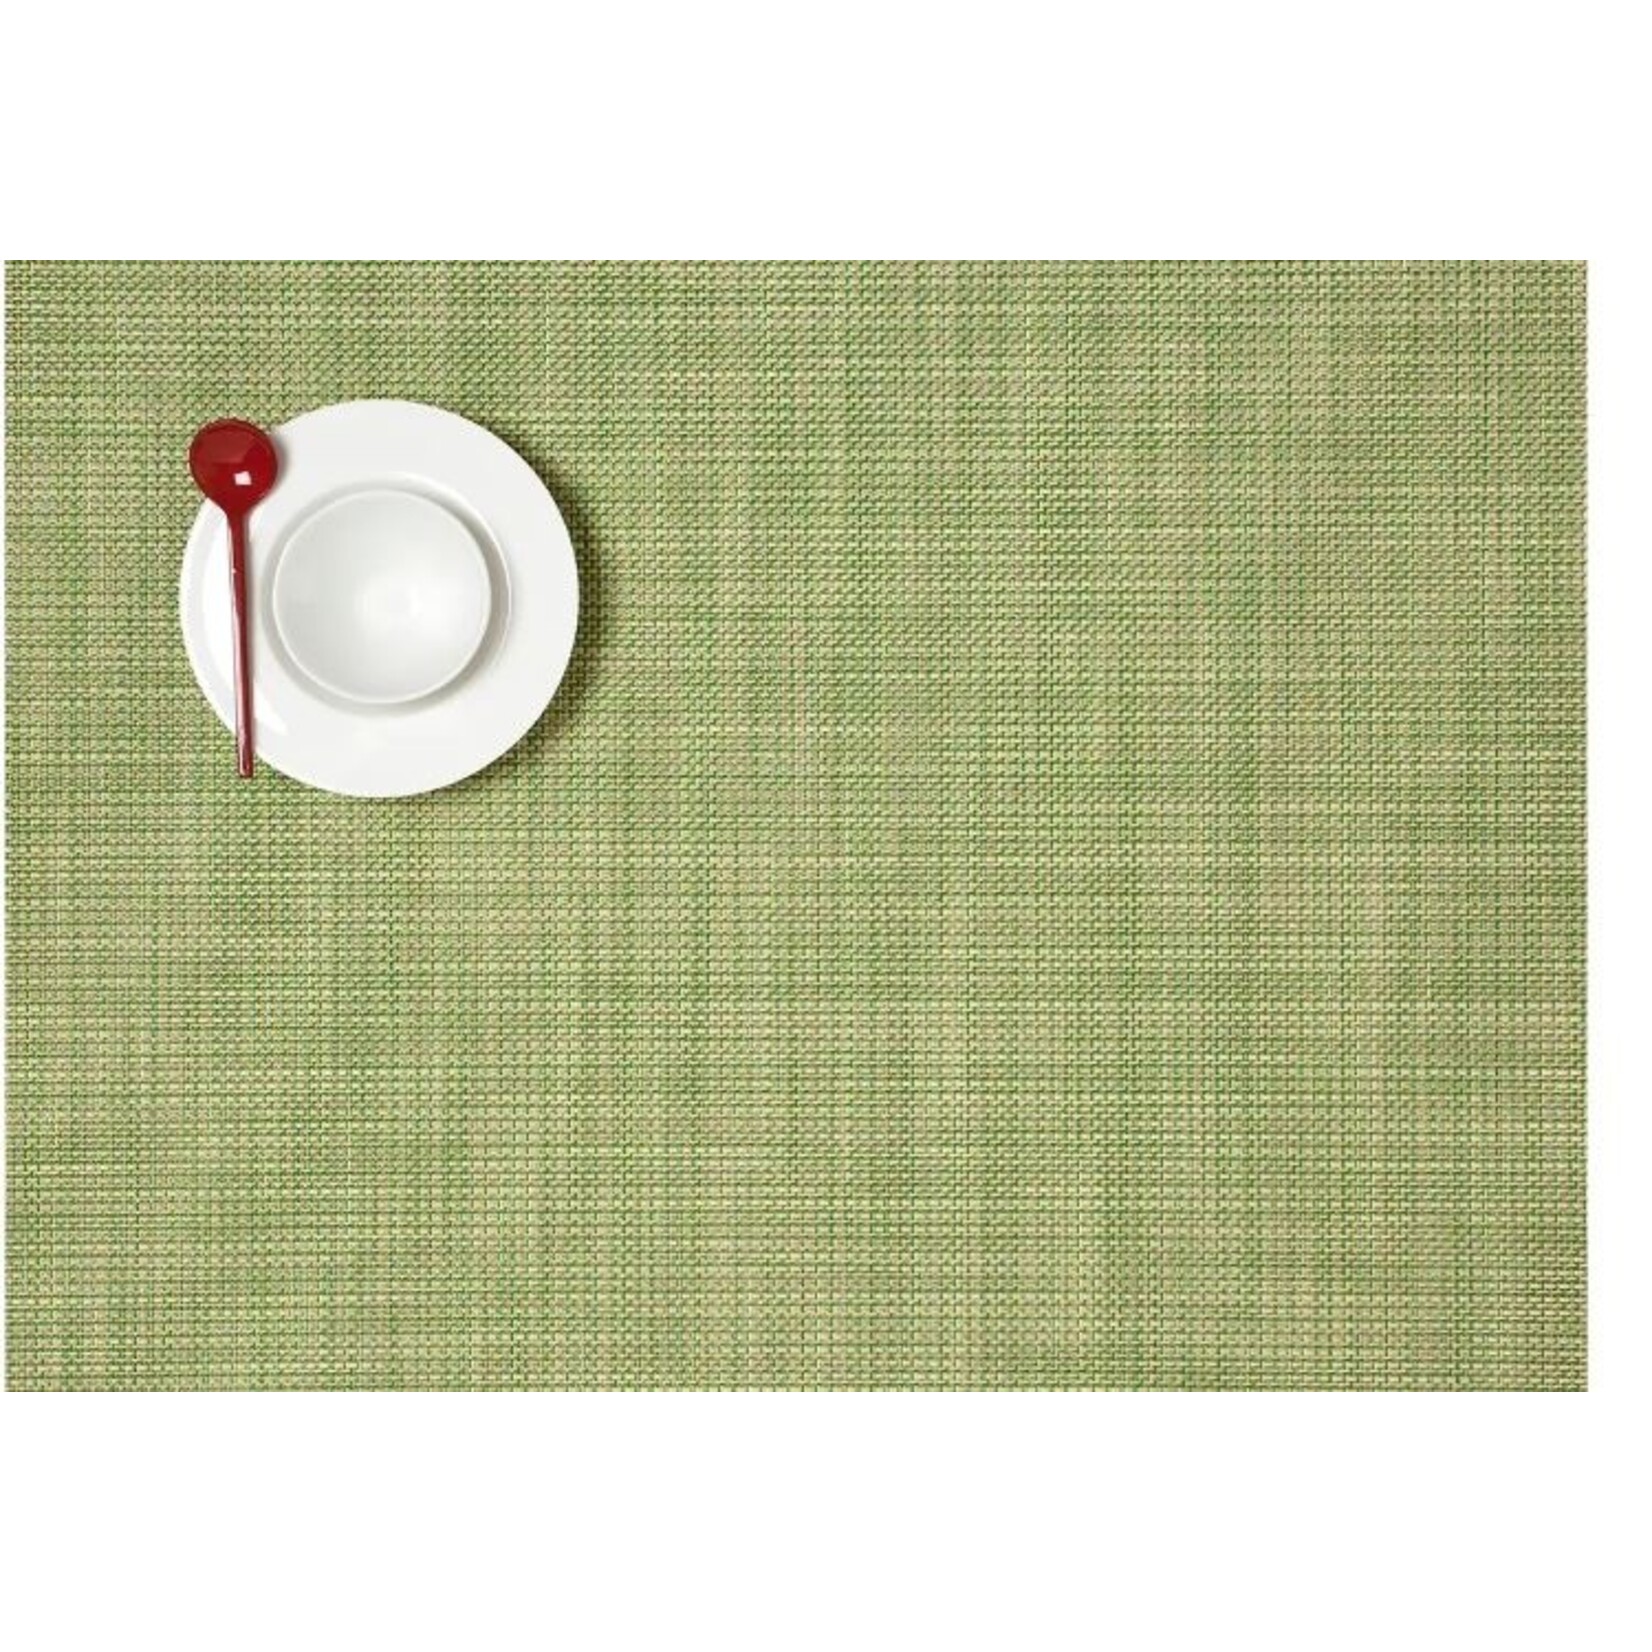 Chilewich Green Grass Placemat Basketweave